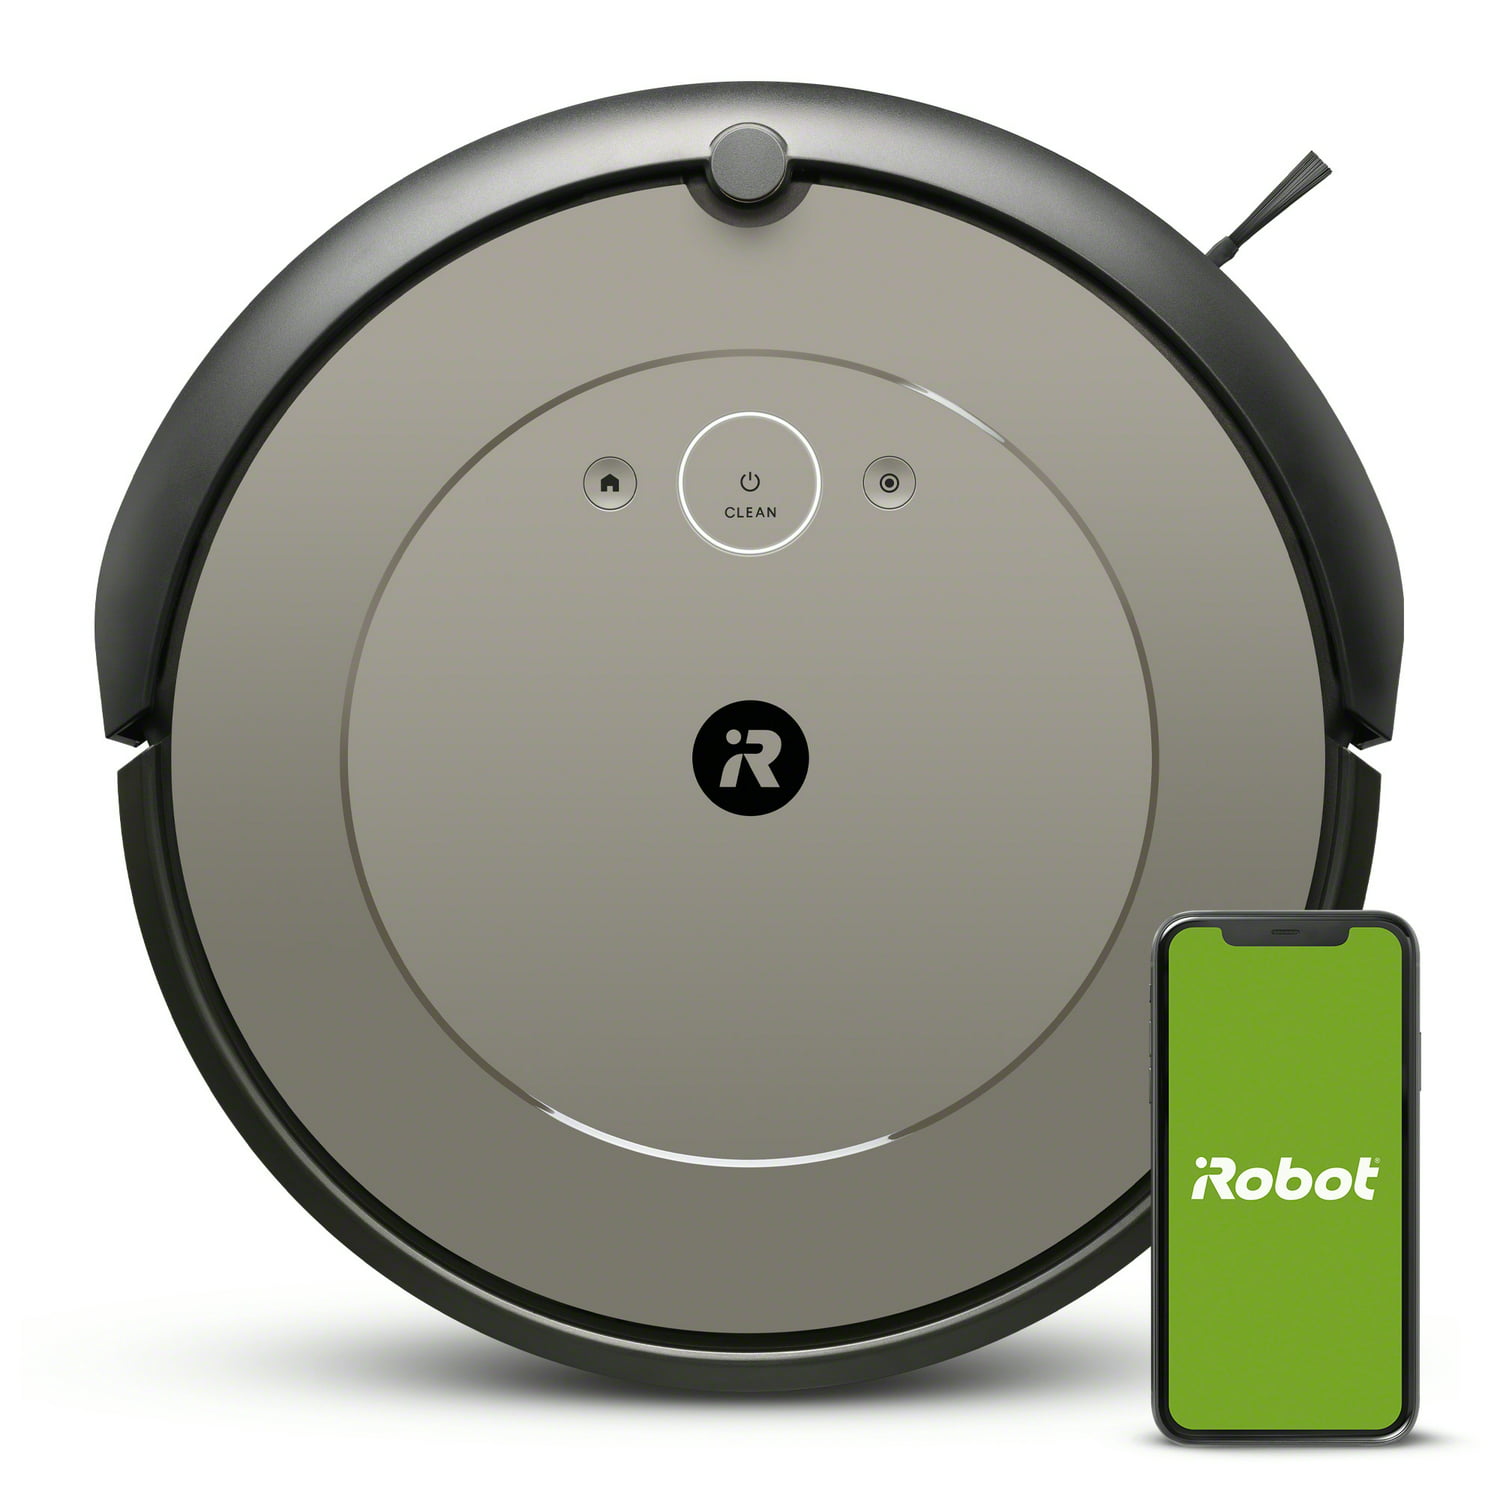 iRobot Roomba i1 (1152)  Robot Vacuum - Wi-Fi® Connected Mapping, Cleans in Rows  $147.50 + Free Shipping